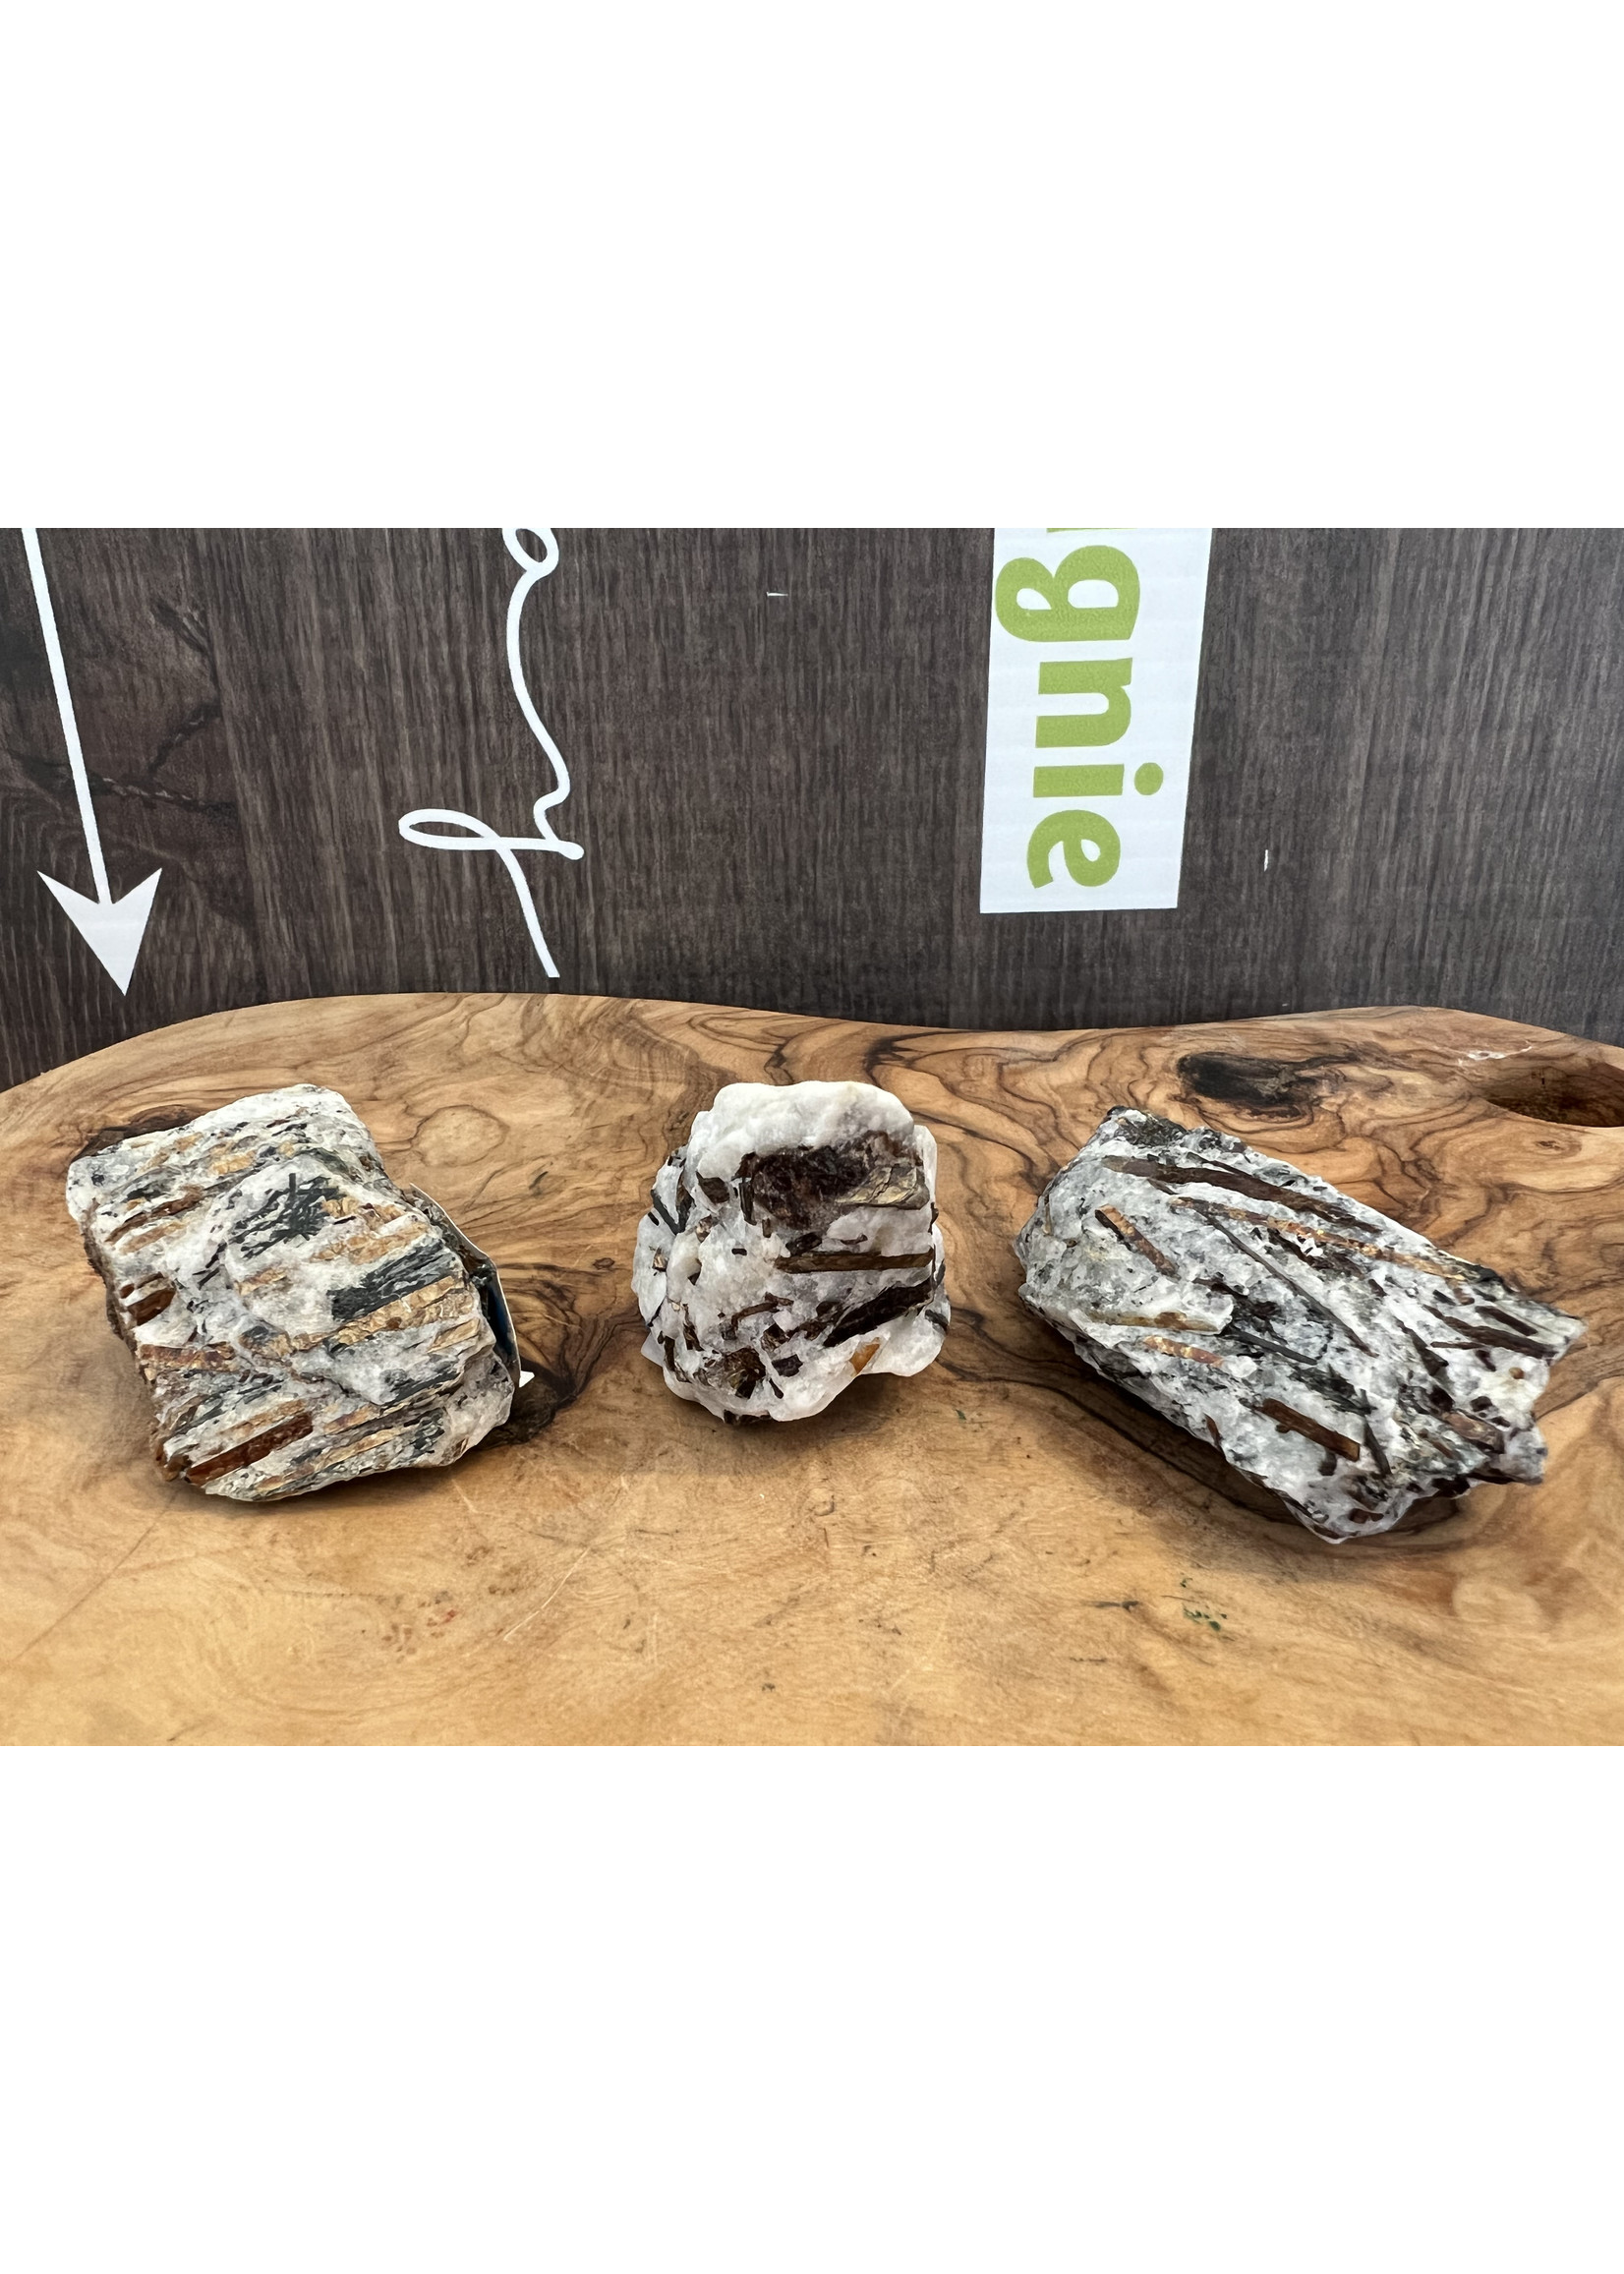 raw astrophyllite pieces, known to balance and regenerate the entire digestive system